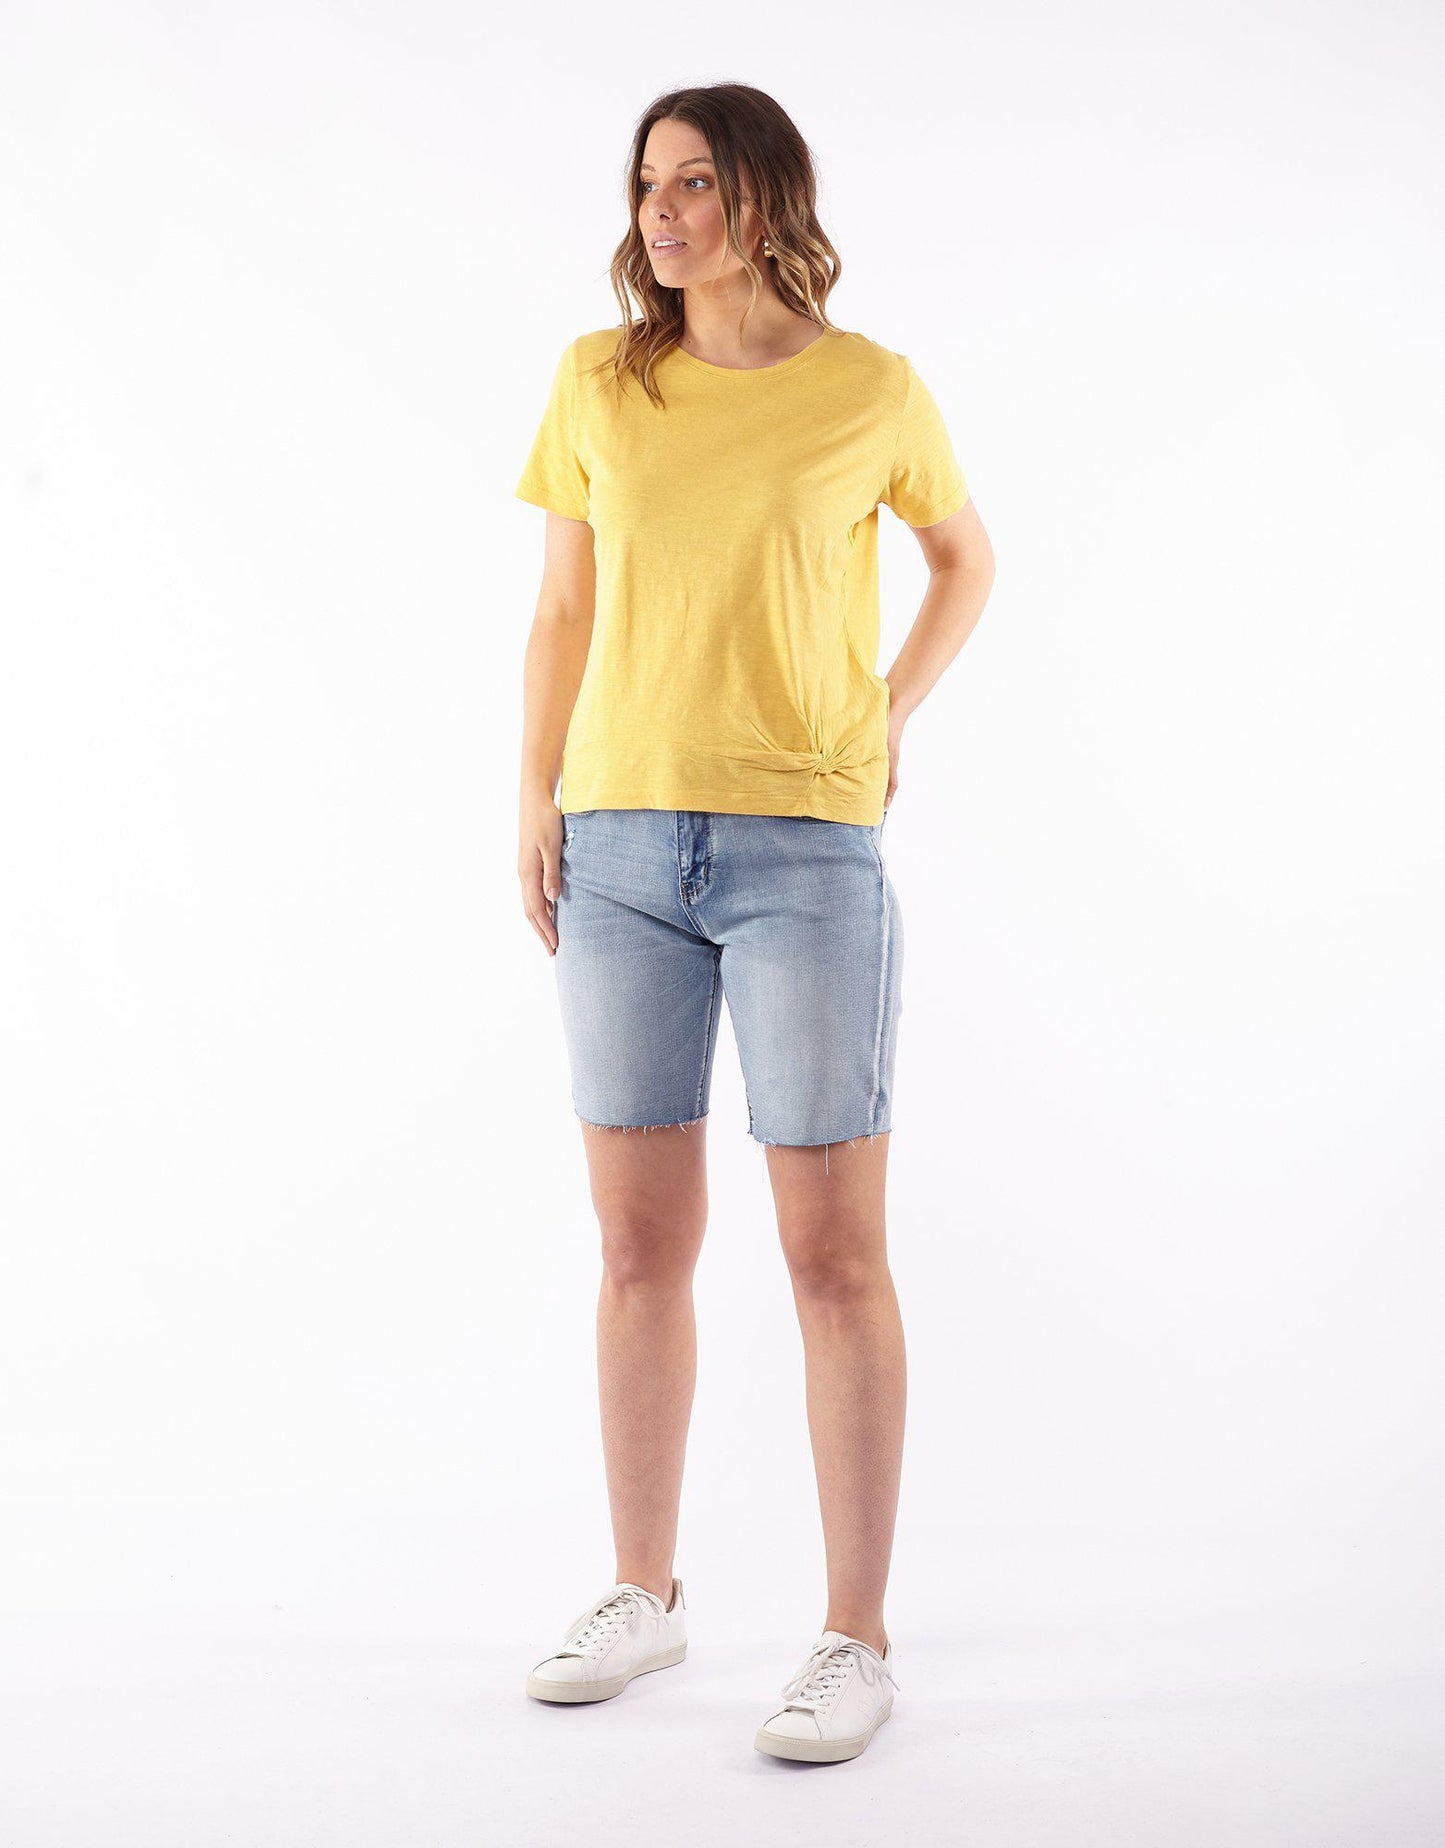 Knot Front Crop Tee - Mustard - Foxwood - FUDGE Gifts Home Lifestyle